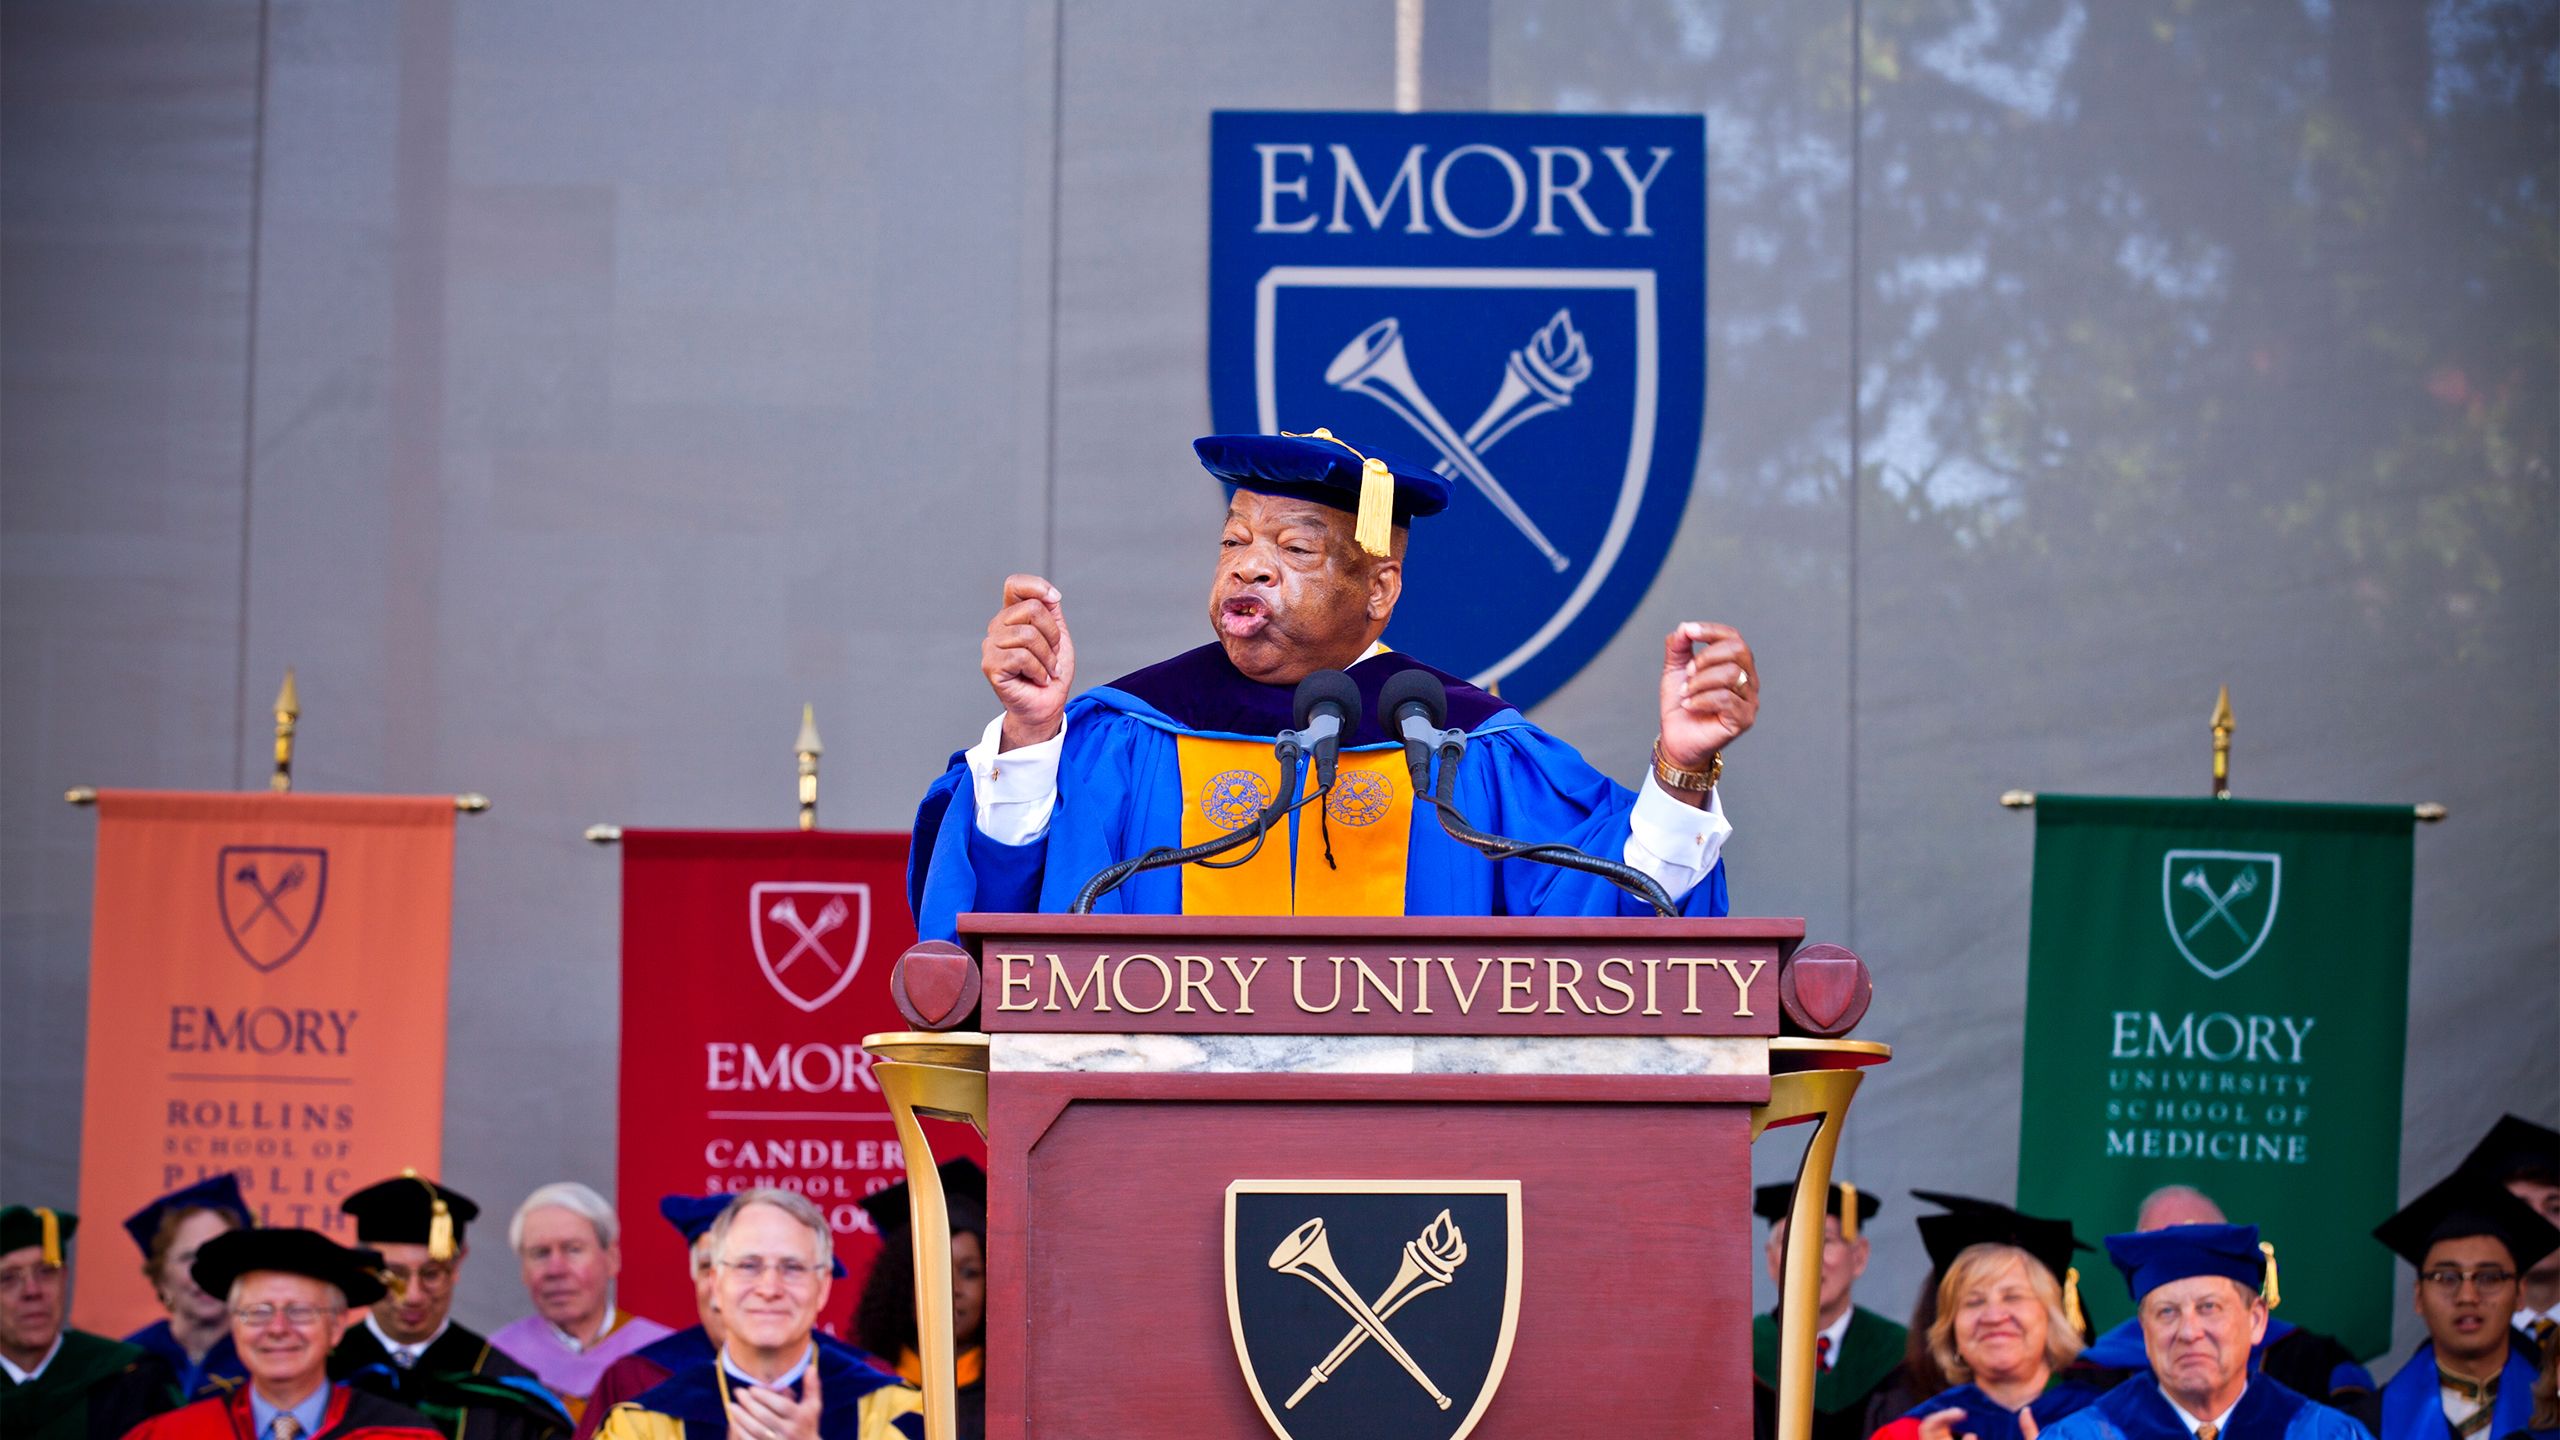 Wearing academic robes, U.S. Rep. John Lewis speaks at an Emory podium with the Emory shield in the background